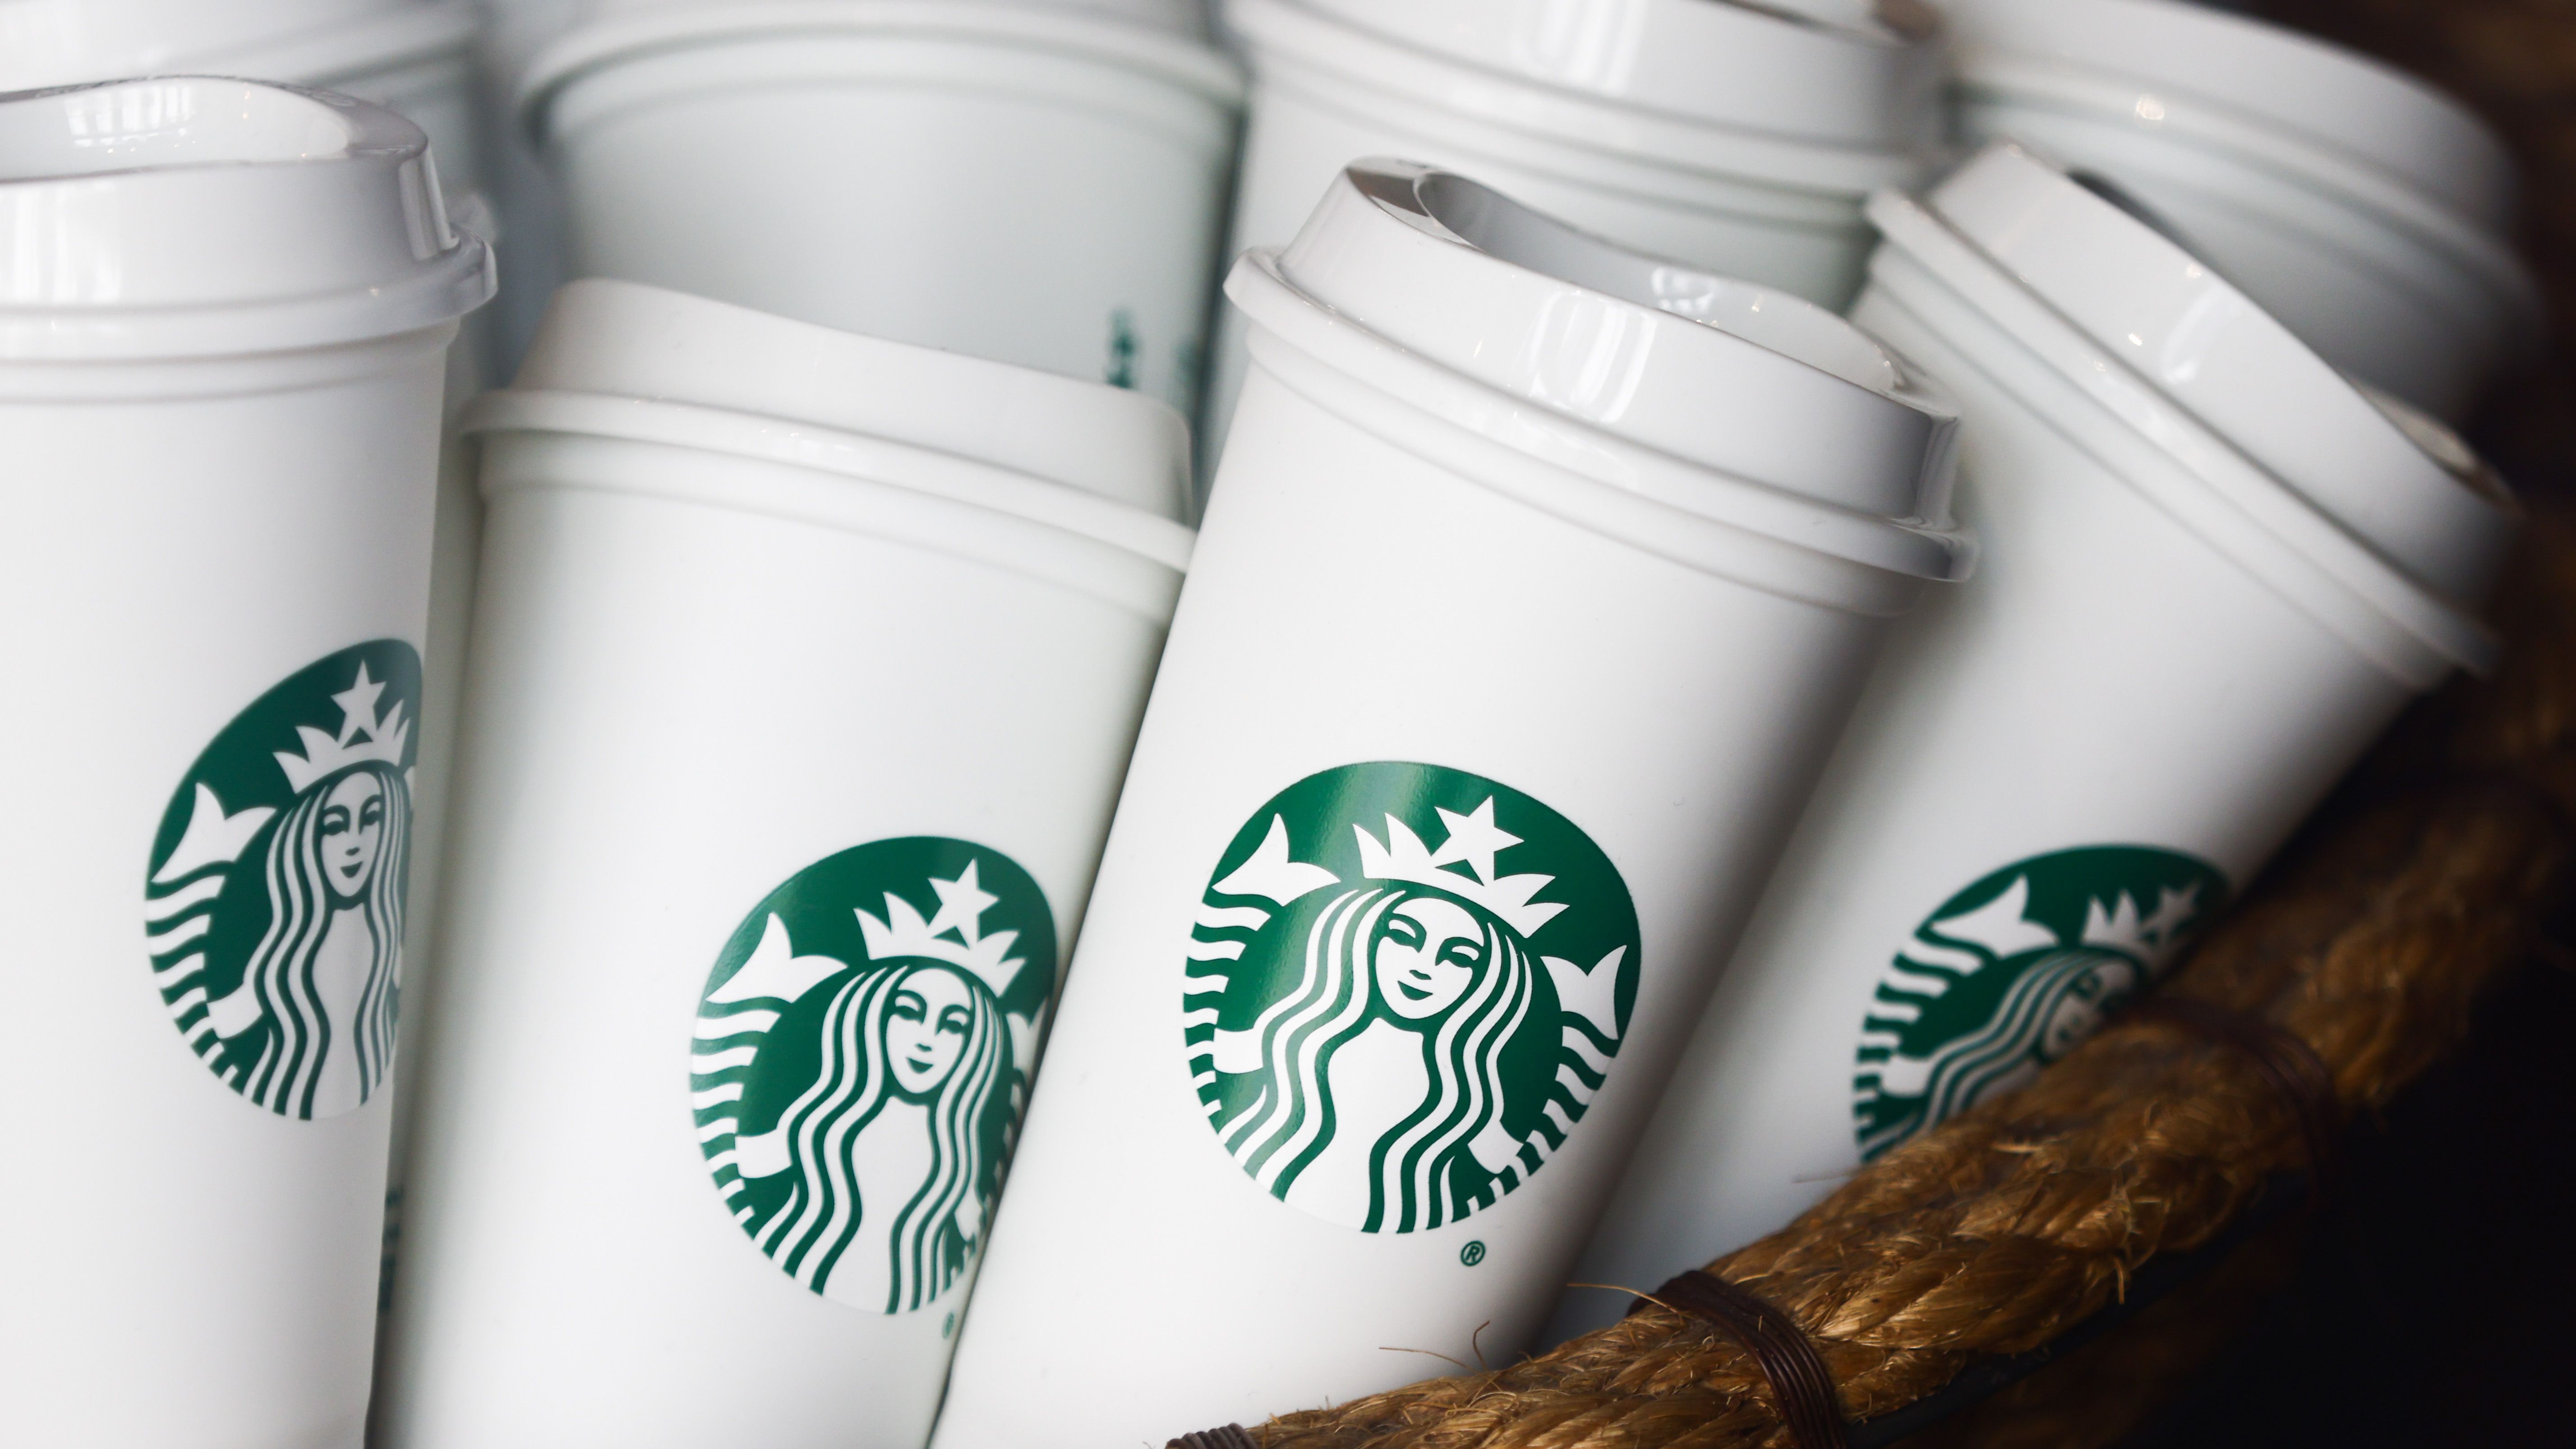 https://hips.hearstapps.com/hmg-prod/images/starbucks-reusable-cups-are-seen-on-in-starbucks-coffee-in-news-photo-1694798079.jpg?crop=1xw:0.84338xh;center,top